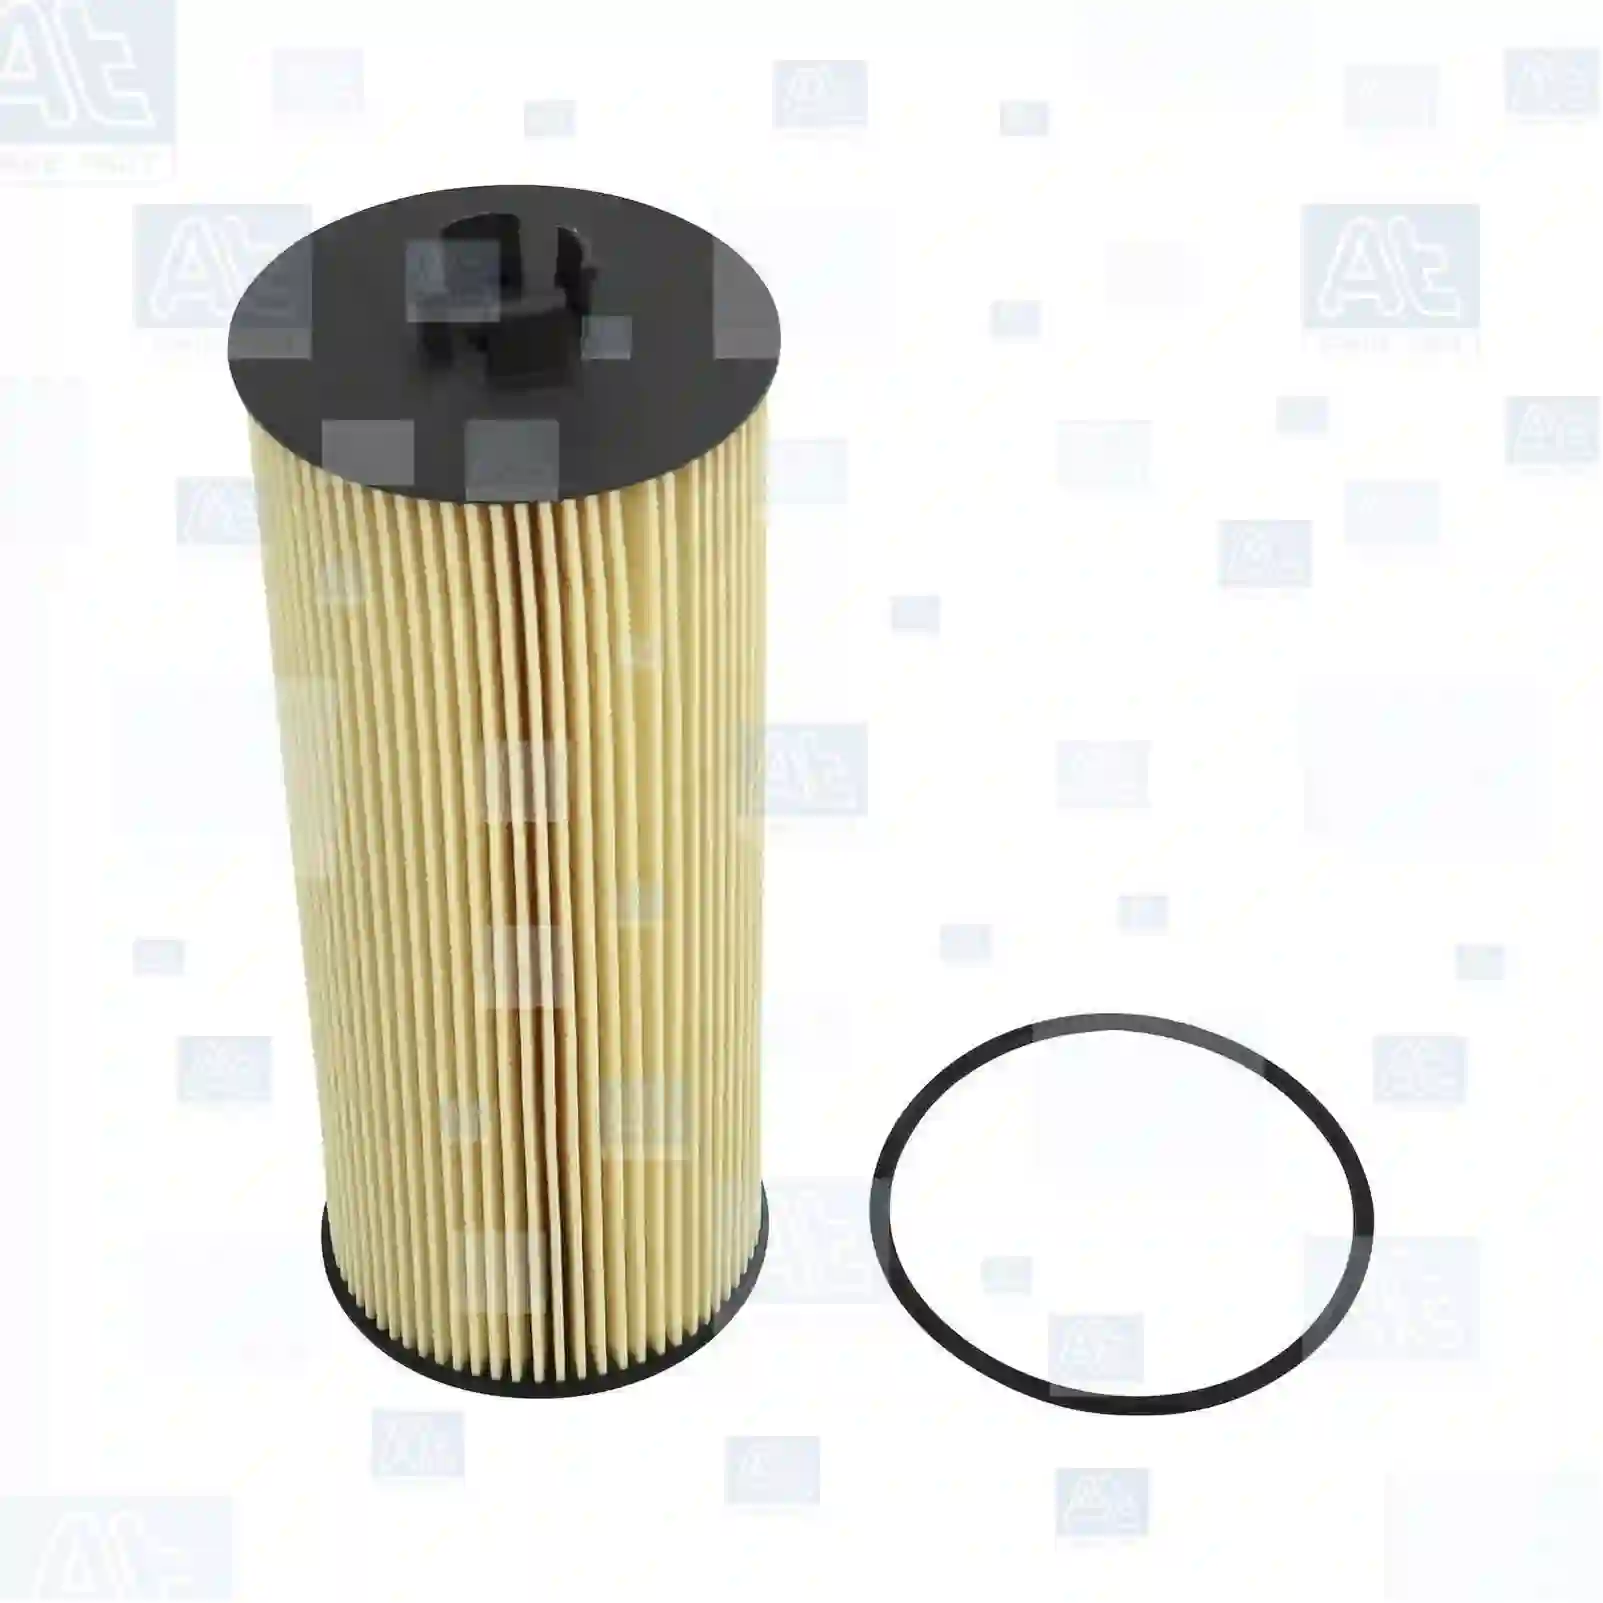 Oil filter insert, 77701928, 0001801709, 0005459530, 44012512, 02931095, 04252248, F716200510020, 0001801709, ABPN10GLF3914, 02931095, 02931095, 04252248, 0001801709, 0001801709, 6861800109, 9061800009, 9061800209, 9061840325, 5021107448, 83120880070, 44012512, 11708551, ZG01738-0008 ||  77701928 At Spare Part | Engine, Accelerator Pedal, Camshaft, Connecting Rod, Crankcase, Crankshaft, Cylinder Head, Engine Suspension Mountings, Exhaust Manifold, Exhaust Gas Recirculation, Filter Kits, Flywheel Housing, General Overhaul Kits, Engine, Intake Manifold, Oil Cleaner, Oil Cooler, Oil Filter, Oil Pump, Oil Sump, Piston & Liner, Sensor & Switch, Timing Case, Turbocharger, Cooling System, Belt Tensioner, Coolant Filter, Coolant Pipe, Corrosion Prevention Agent, Drive, Expansion Tank, Fan, Intercooler, Monitors & Gauges, Radiator, Thermostat, V-Belt / Timing belt, Water Pump, Fuel System, Electronical Injector Unit, Feed Pump, Fuel Filter, cpl., Fuel Gauge Sender,  Fuel Line, Fuel Pump, Fuel Tank, Injection Line Kit, Injection Pump, Exhaust System, Clutch & Pedal, Gearbox, Propeller Shaft, Axles, Brake System, Hubs & Wheels, Suspension, Leaf Spring, Universal Parts / Accessories, Steering, Electrical System, Cabin Oil filter insert, 77701928, 0001801709, 0005459530, 44012512, 02931095, 04252248, F716200510020, 0001801709, ABPN10GLF3914, 02931095, 02931095, 04252248, 0001801709, 0001801709, 6861800109, 9061800009, 9061800209, 9061840325, 5021107448, 83120880070, 44012512, 11708551, ZG01738-0008 ||  77701928 At Spare Part | Engine, Accelerator Pedal, Camshaft, Connecting Rod, Crankcase, Crankshaft, Cylinder Head, Engine Suspension Mountings, Exhaust Manifold, Exhaust Gas Recirculation, Filter Kits, Flywheel Housing, General Overhaul Kits, Engine, Intake Manifold, Oil Cleaner, Oil Cooler, Oil Filter, Oil Pump, Oil Sump, Piston & Liner, Sensor & Switch, Timing Case, Turbocharger, Cooling System, Belt Tensioner, Coolant Filter, Coolant Pipe, Corrosion Prevention Agent, Drive, Expansion Tank, Fan, Intercooler, Monitors & Gauges, Radiator, Thermostat, V-Belt / Timing belt, Water Pump, Fuel System, Electronical Injector Unit, Feed Pump, Fuel Filter, cpl., Fuel Gauge Sender,  Fuel Line, Fuel Pump, Fuel Tank, Injection Line Kit, Injection Pump, Exhaust System, Clutch & Pedal, Gearbox, Propeller Shaft, Axles, Brake System, Hubs & Wheels, Suspension, Leaf Spring, Universal Parts / Accessories, Steering, Electrical System, Cabin